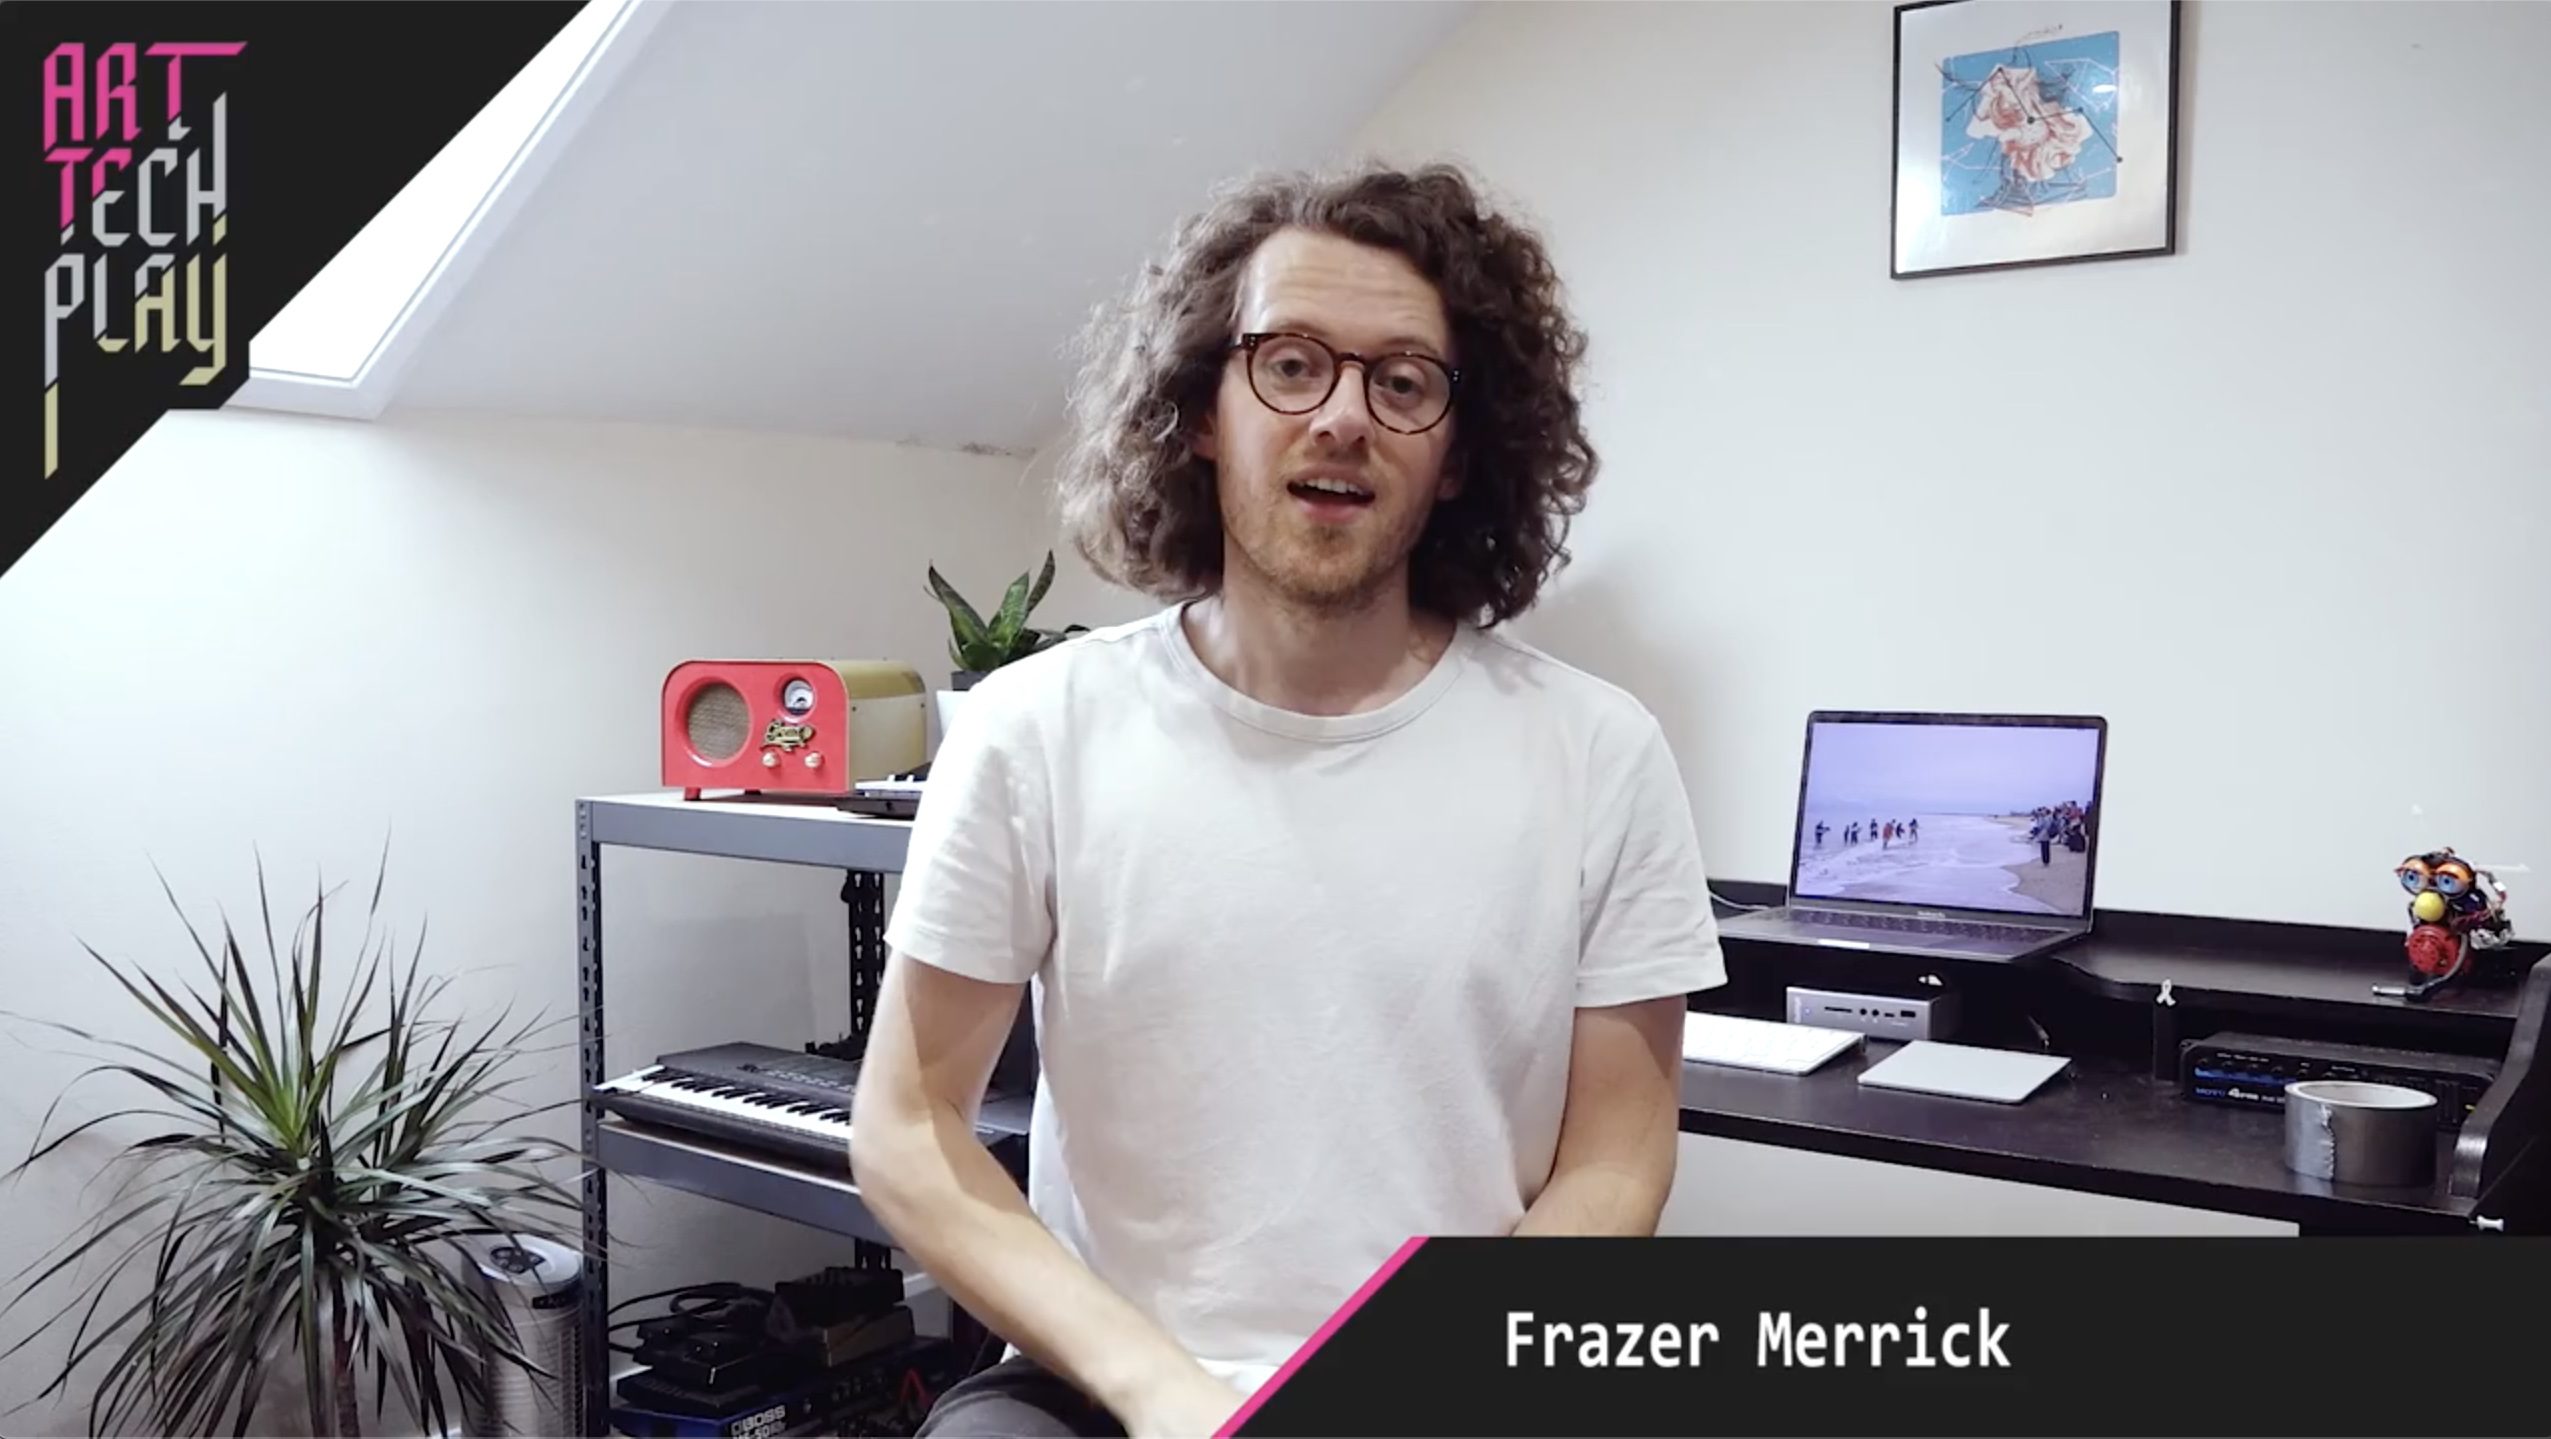 Frazer Merrick on experimenting with live streaming